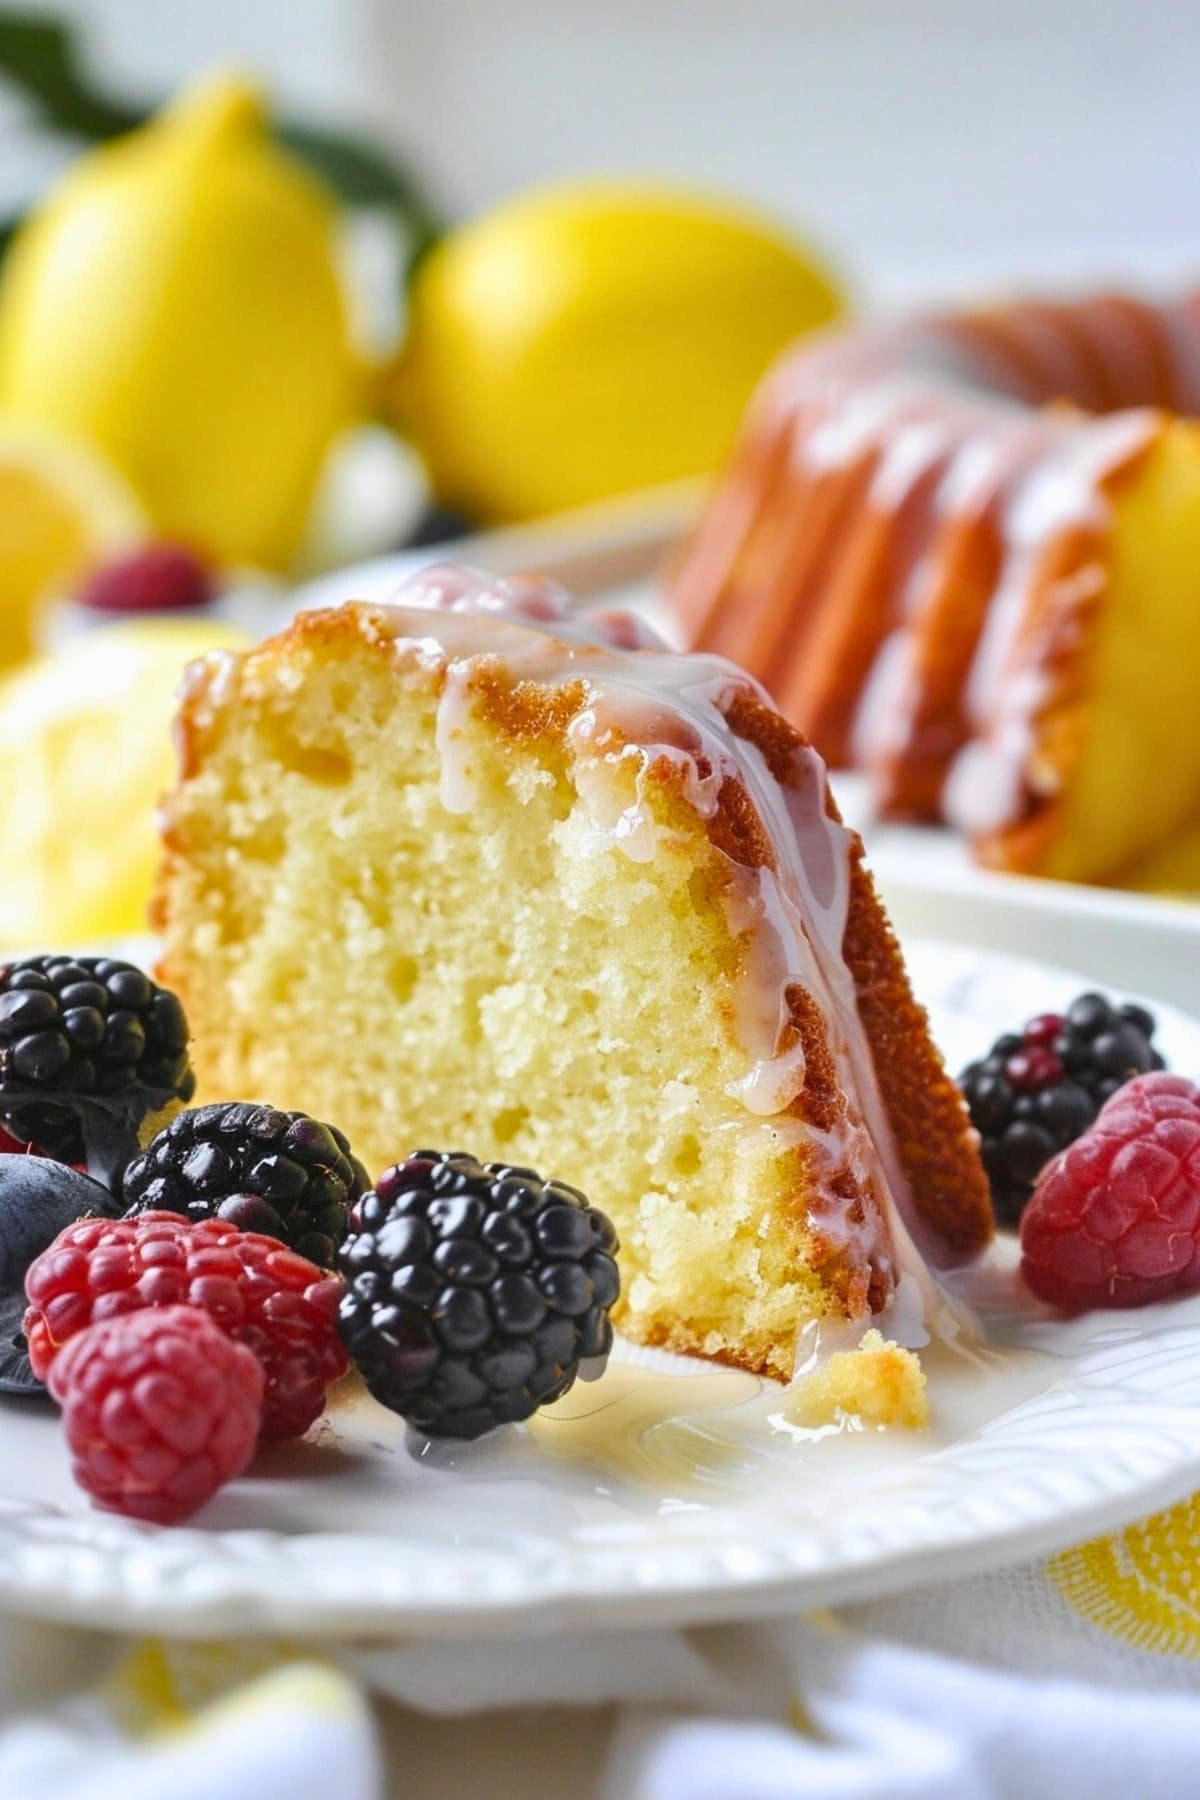 A slice of million dollar pound cake garnished with fresh berries.